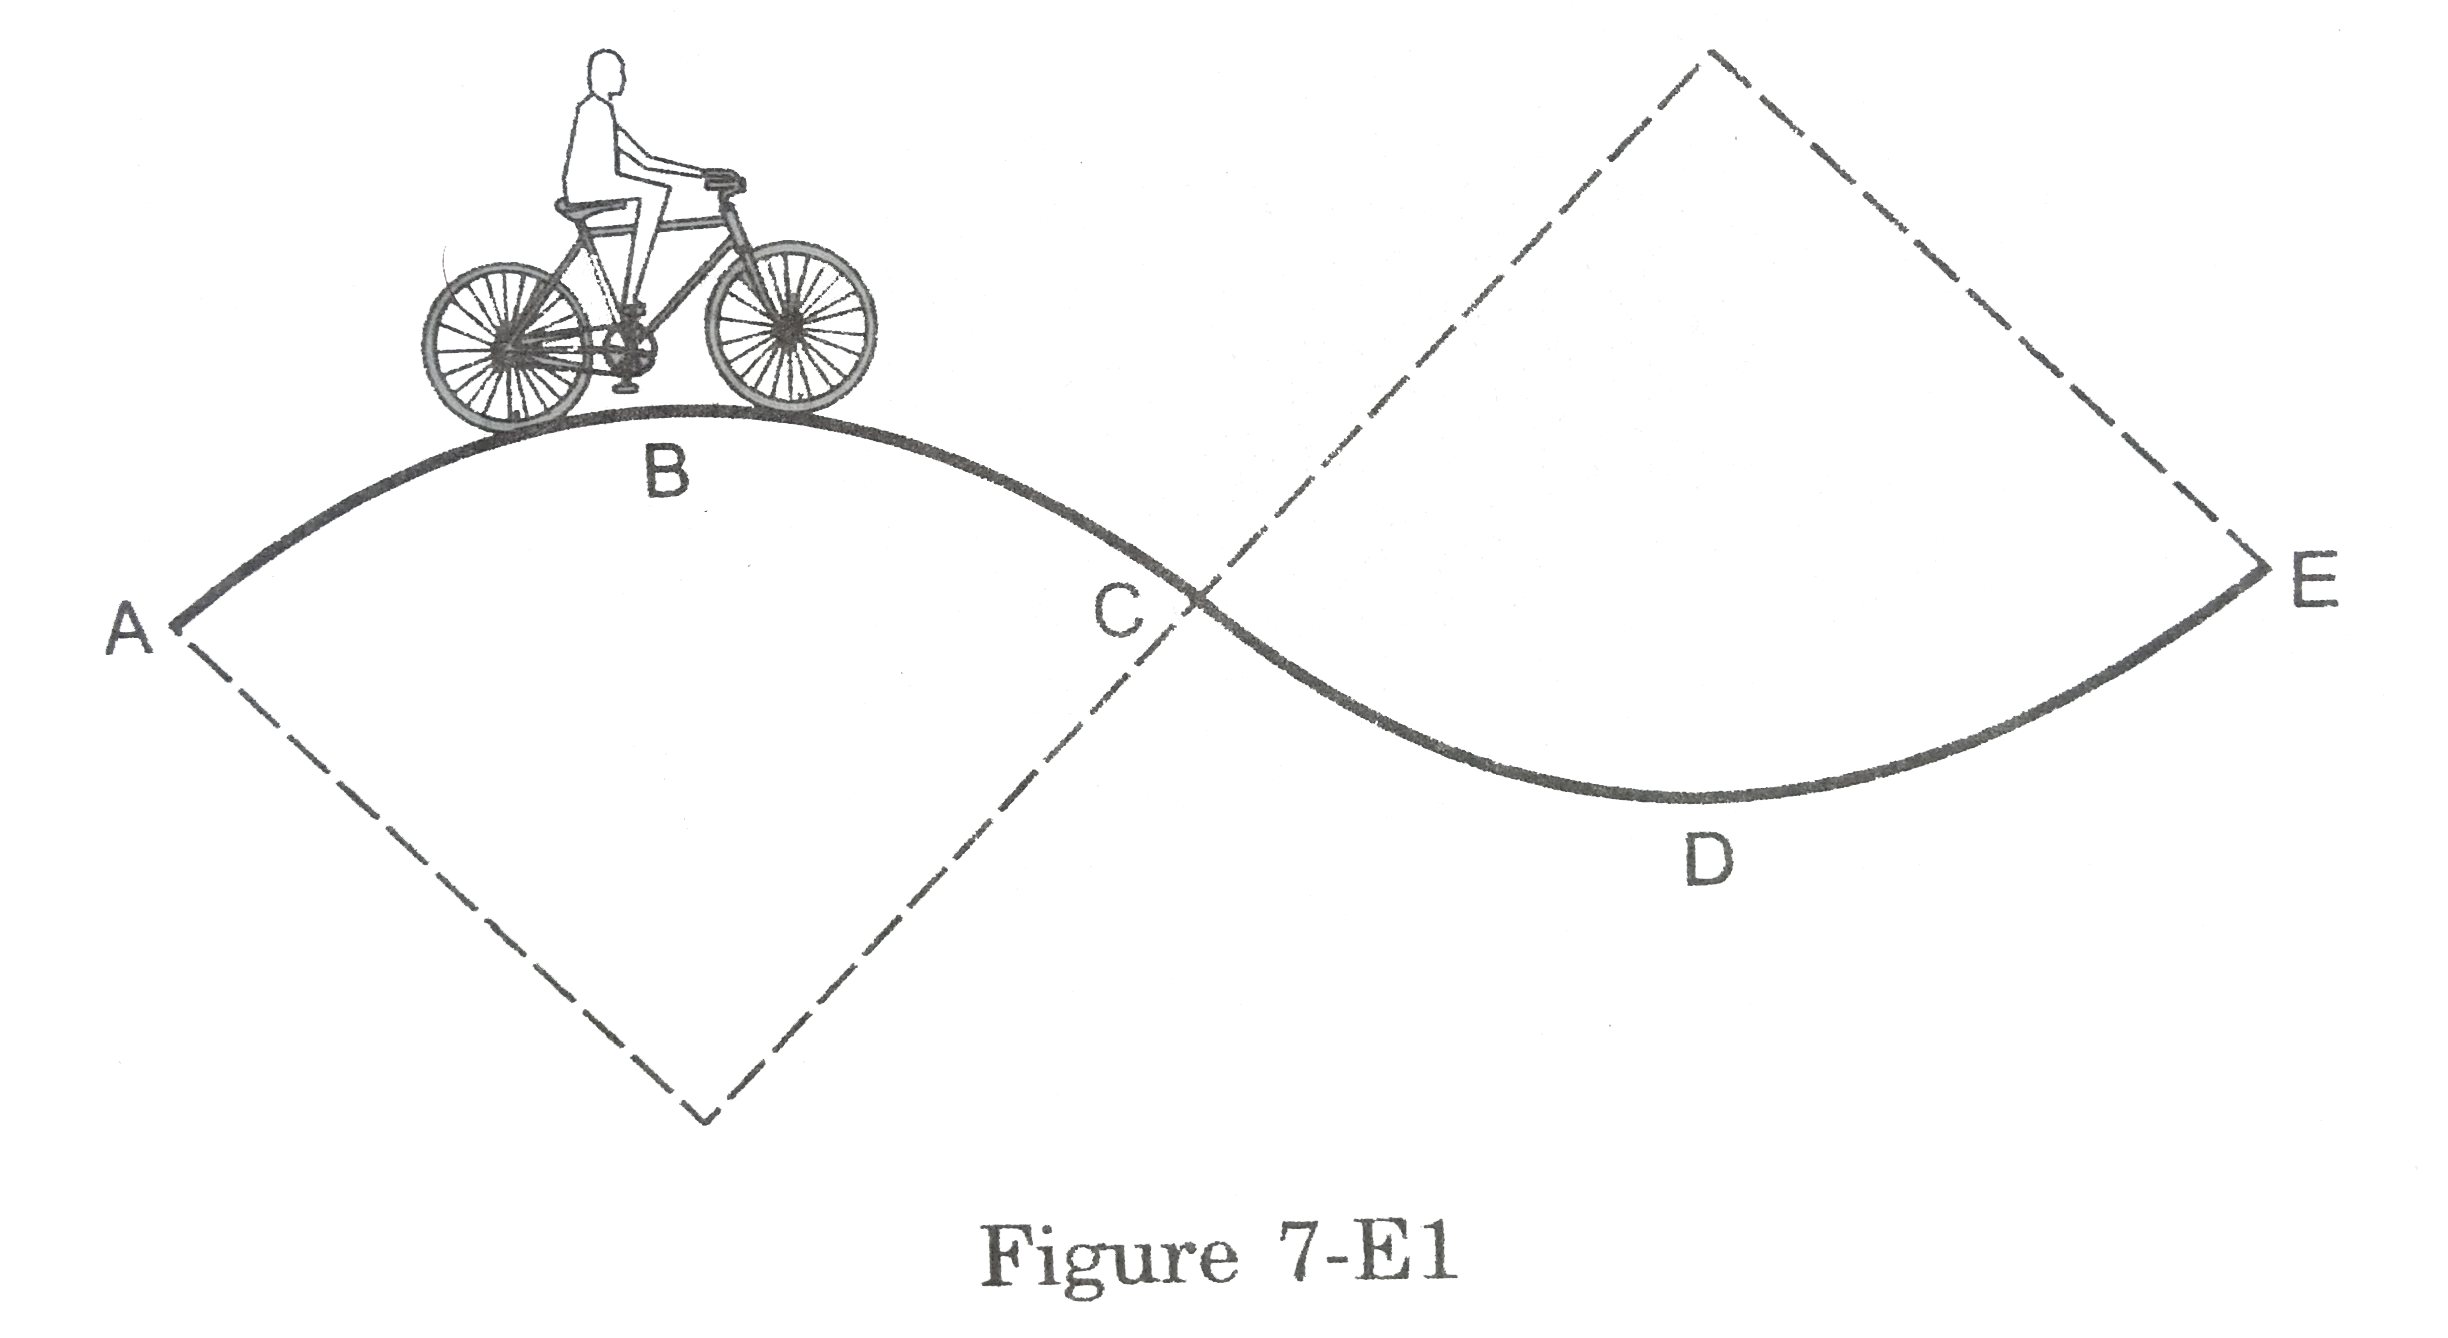 A track consists of two circular pars ABC andCDE of equal rdius 100 m and joined smoothly as shown in figure.Each part sutends a right ngle at its centre. A cycle weighing 100 kg together with rider travels at a constant speed of 18 km/h on the track. A. Findteh nromal contct force by tehroad on the cycle whenit is at B and at D. b.Findteh force of friction exerted by the track on the tyres when the cycle is at B,C and D. c. Find the normal force between teh road and teh cycle just before and just after the cycle crosses C. d. What should be the minimum friction coefficient between the road and the tyre, which will ensure that teh cyclist can move with constant speed? Take g=10 m/s^2